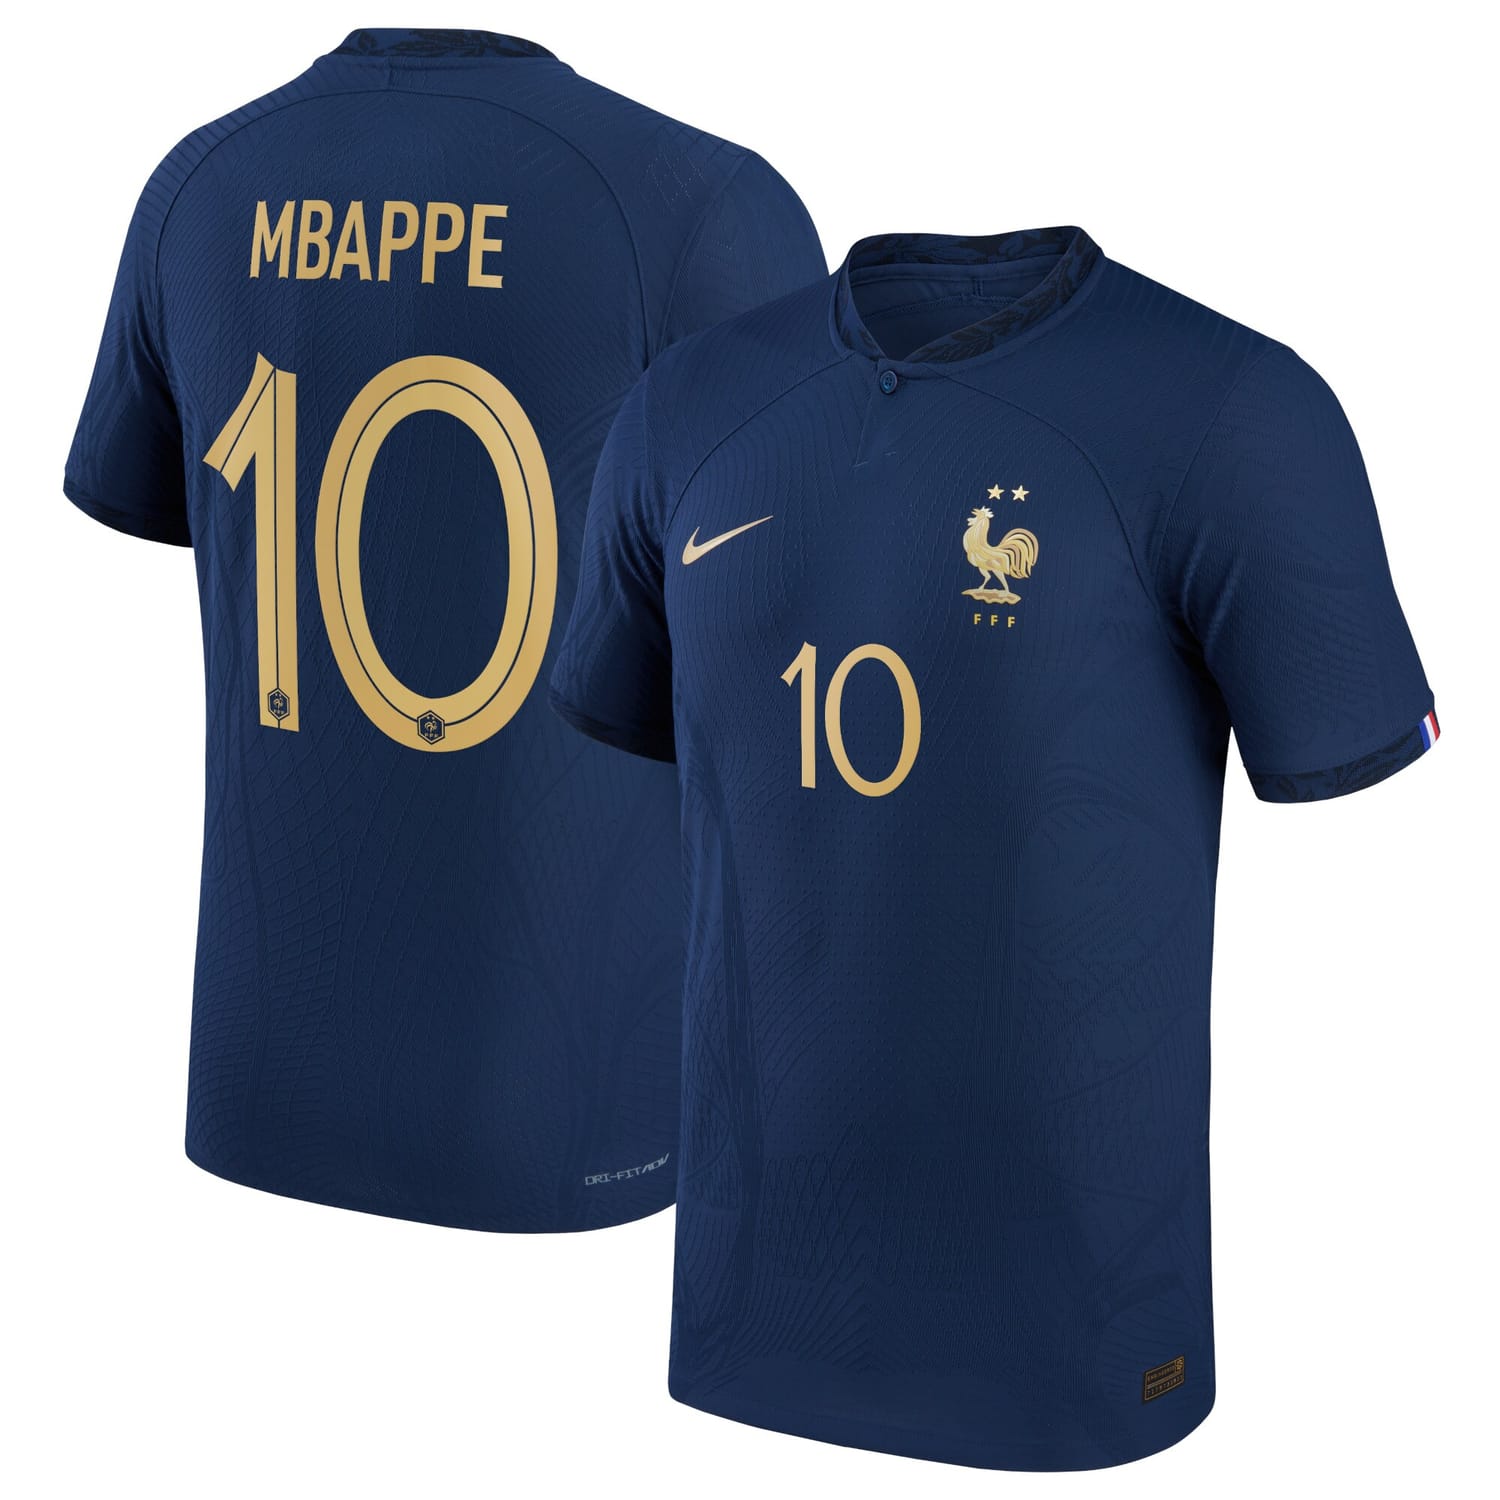 France National Team Home Authentic Jersey Shirt 2022 player Kylian Mbappe 10 printing for Men